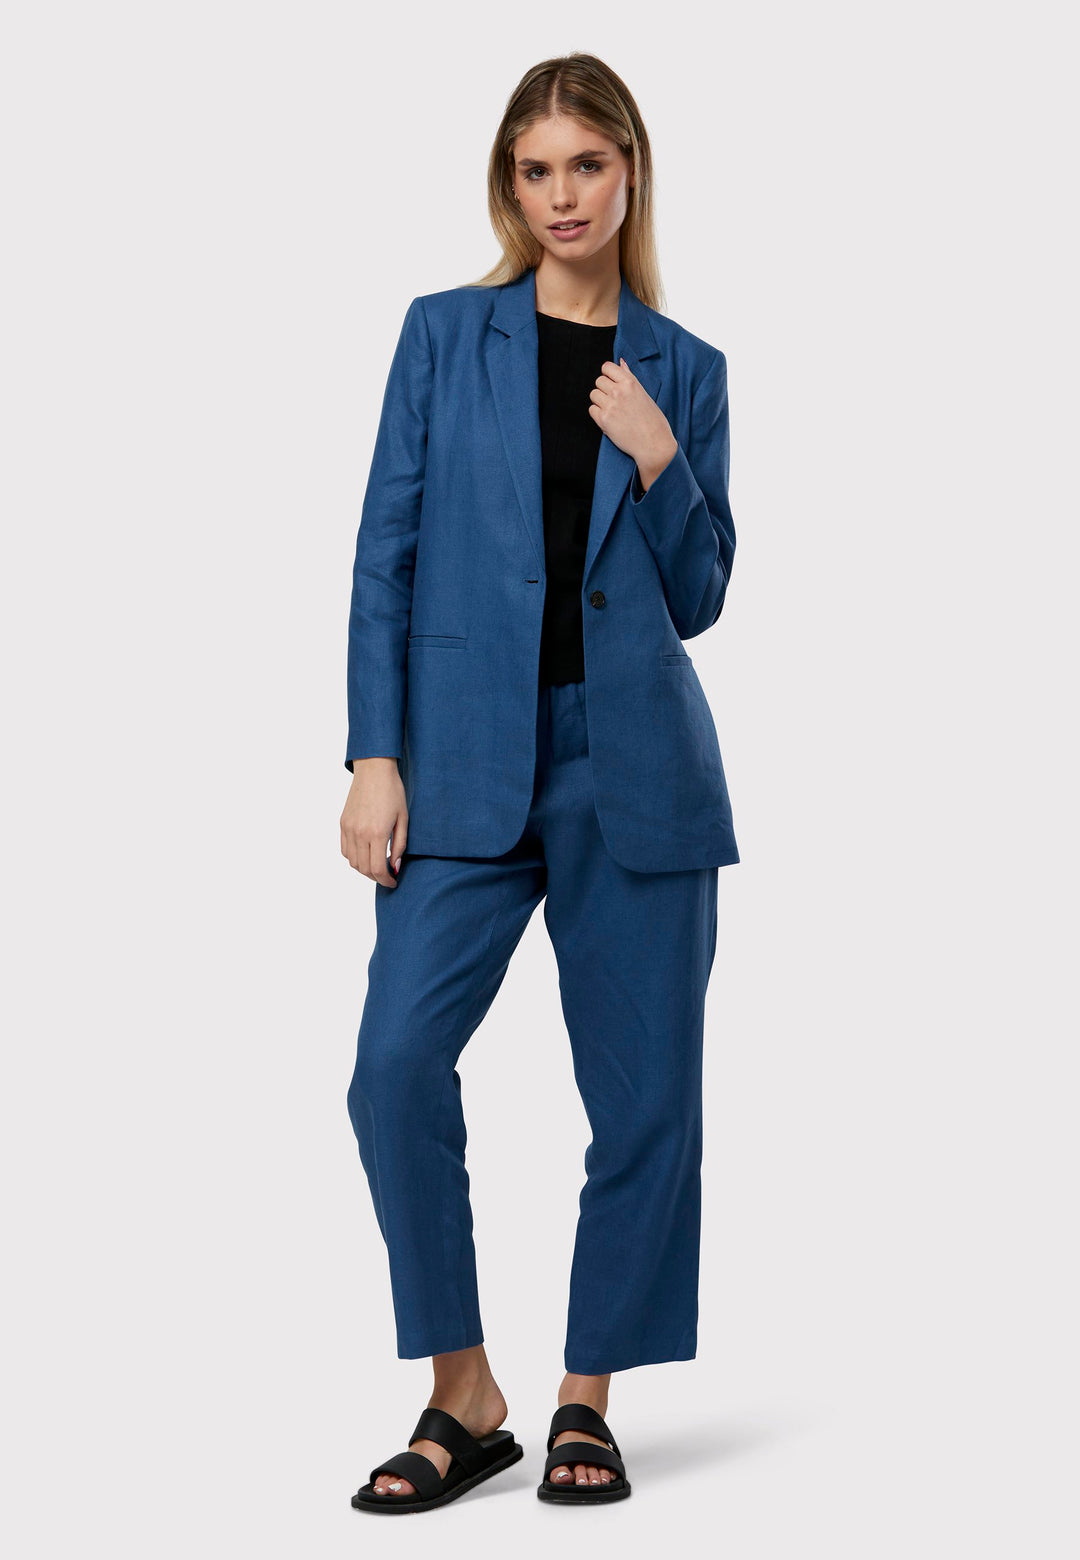 Cassie, the investment-worthy borage blue linen blazer. The epitome of summer sophistication. Minimalist styling accentuated by a single button fastening and an oversized, slightly boxy silhouette. Pair it effortlessly with a simple tee and the coordinating Vanessa pant, finished with trainers for a chic and contemporary ensemble.